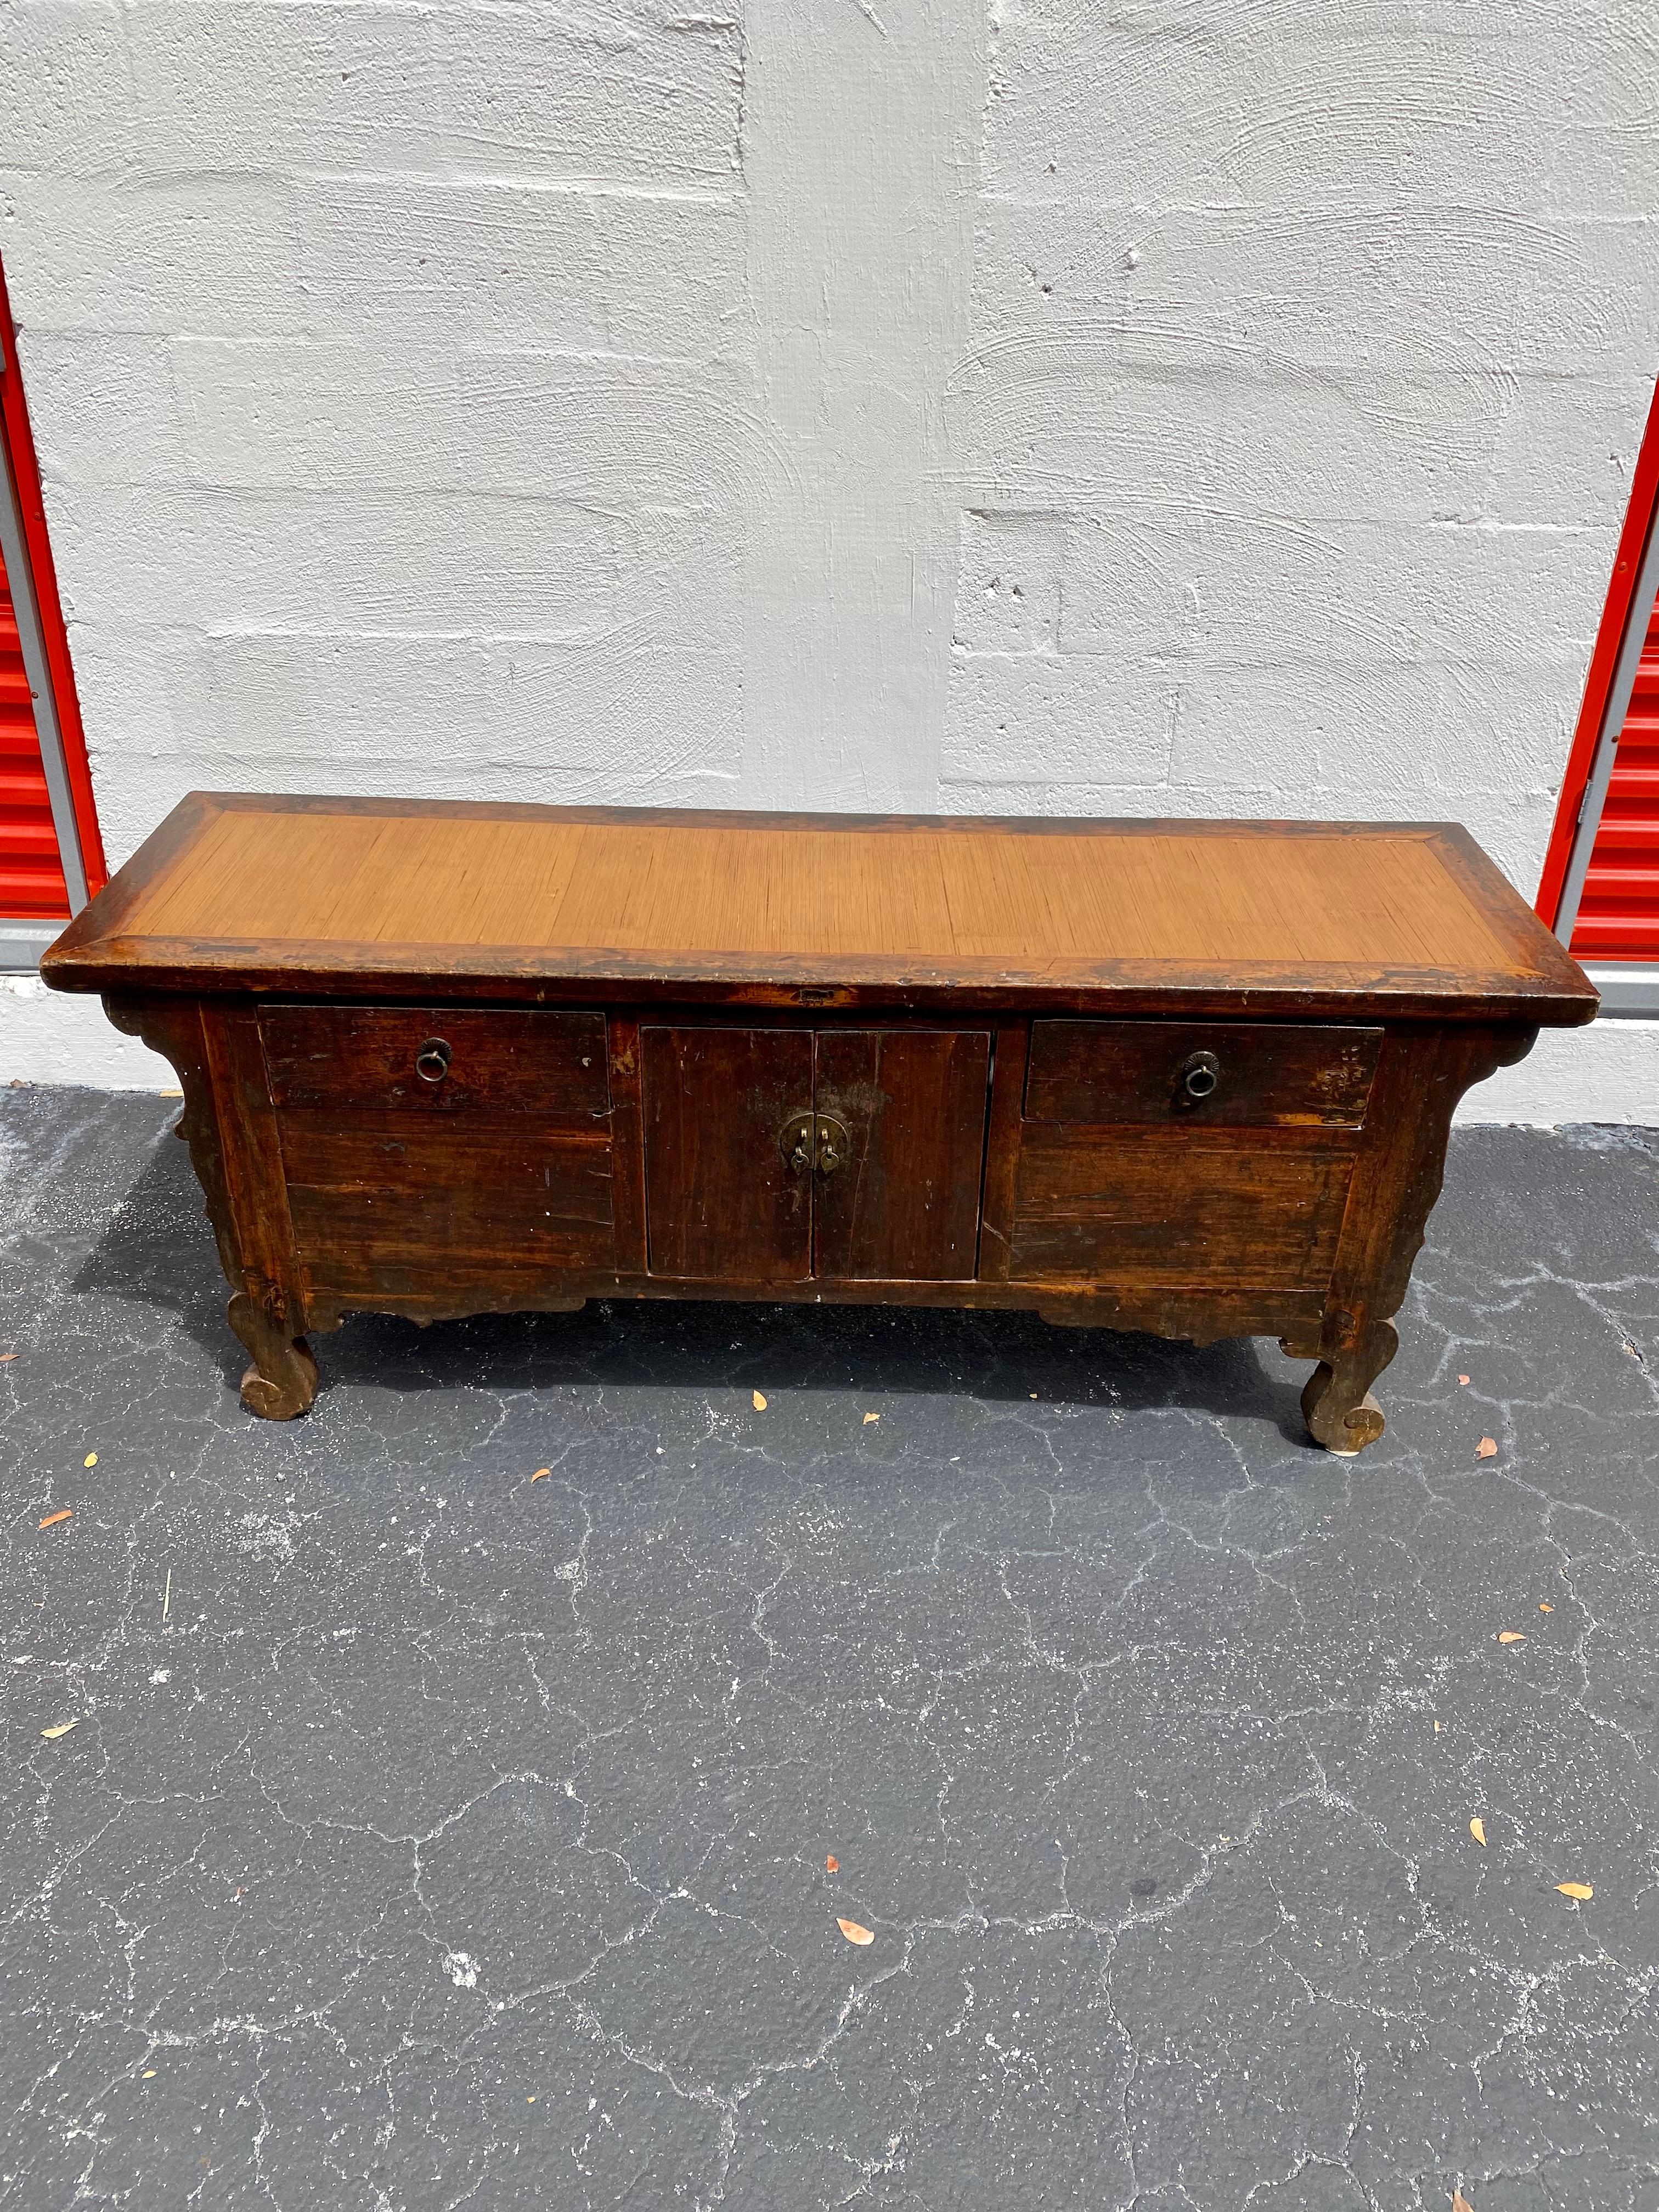 On offer on this occasion is one of the most stunning and rare, sideboard storage cabinet you could hope to find. Outstanding design is exhibited throughout. The beautiful cabinet is statement piece which is also extremely comfortable and packed